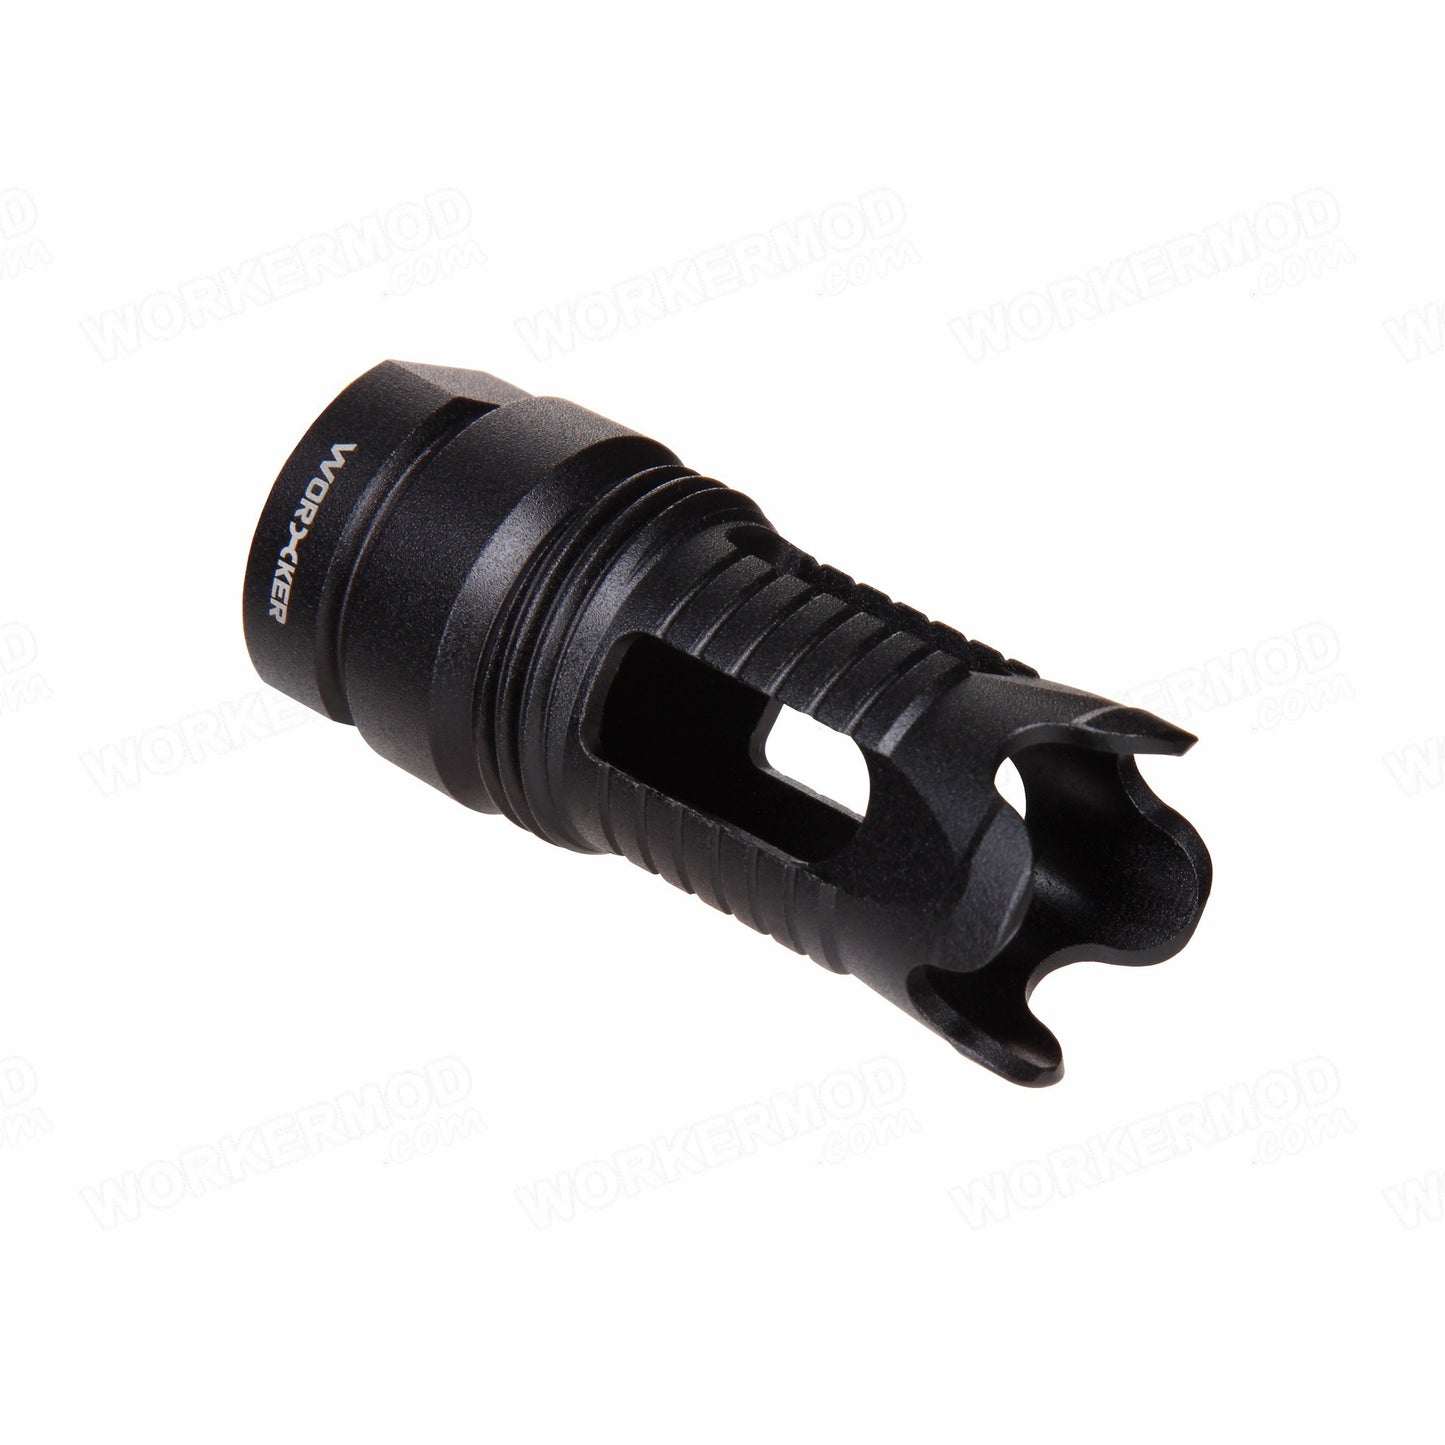 Worker Phantom Style Muzzle / Flash Hider (Threaded Connector) CLOSEOUT